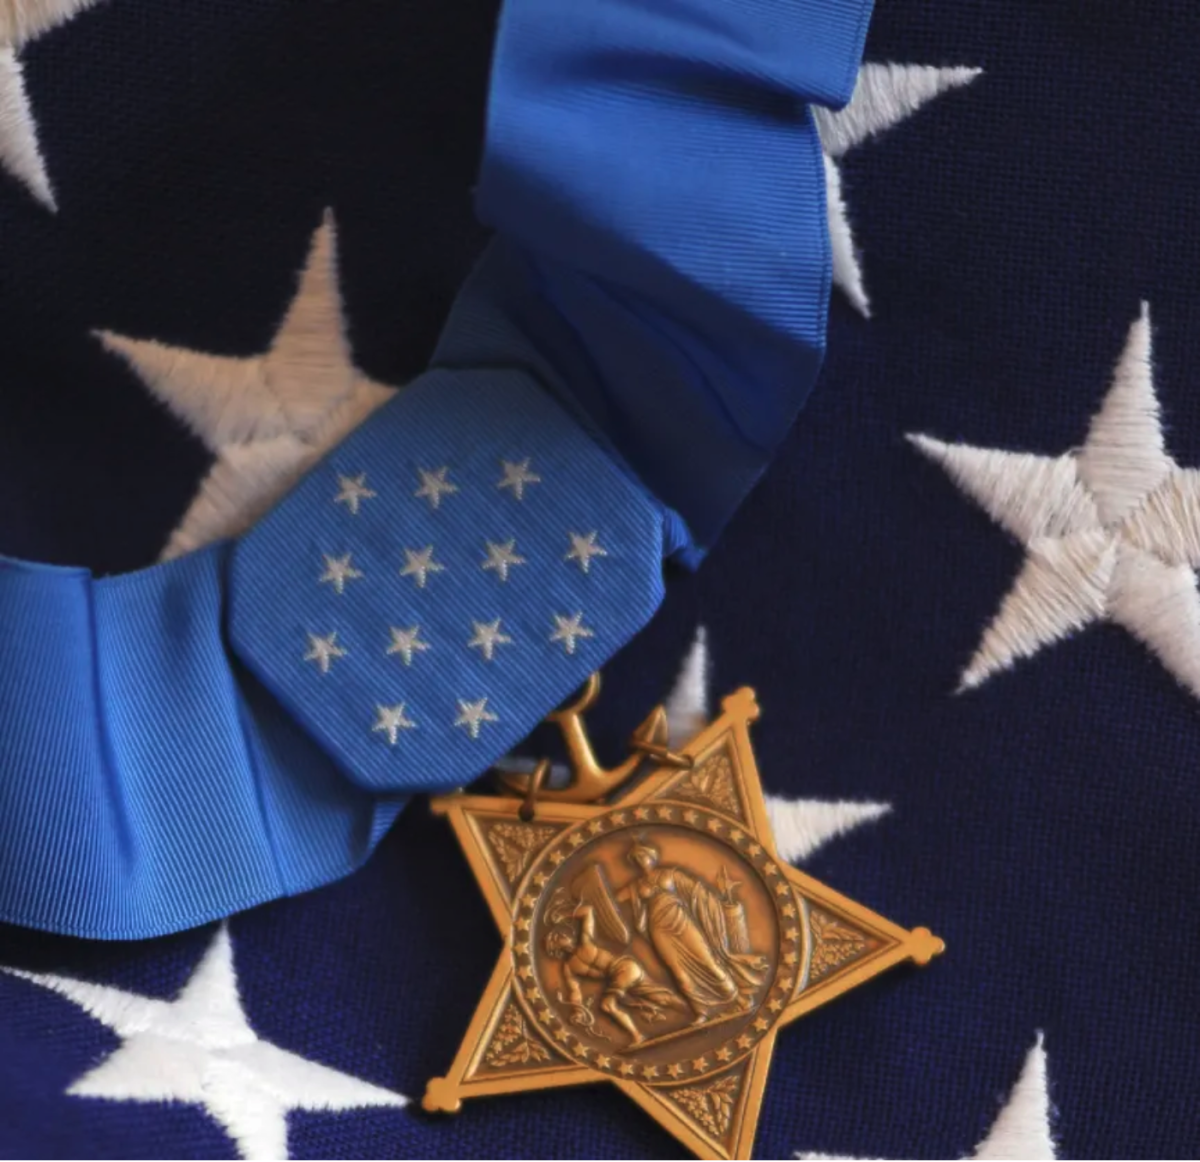 Eventually, Memorial Day, or the days surrounding it, became a time to pay homage to those who have received America's most prestigious and highest military decoration, the Medal of Honor. 